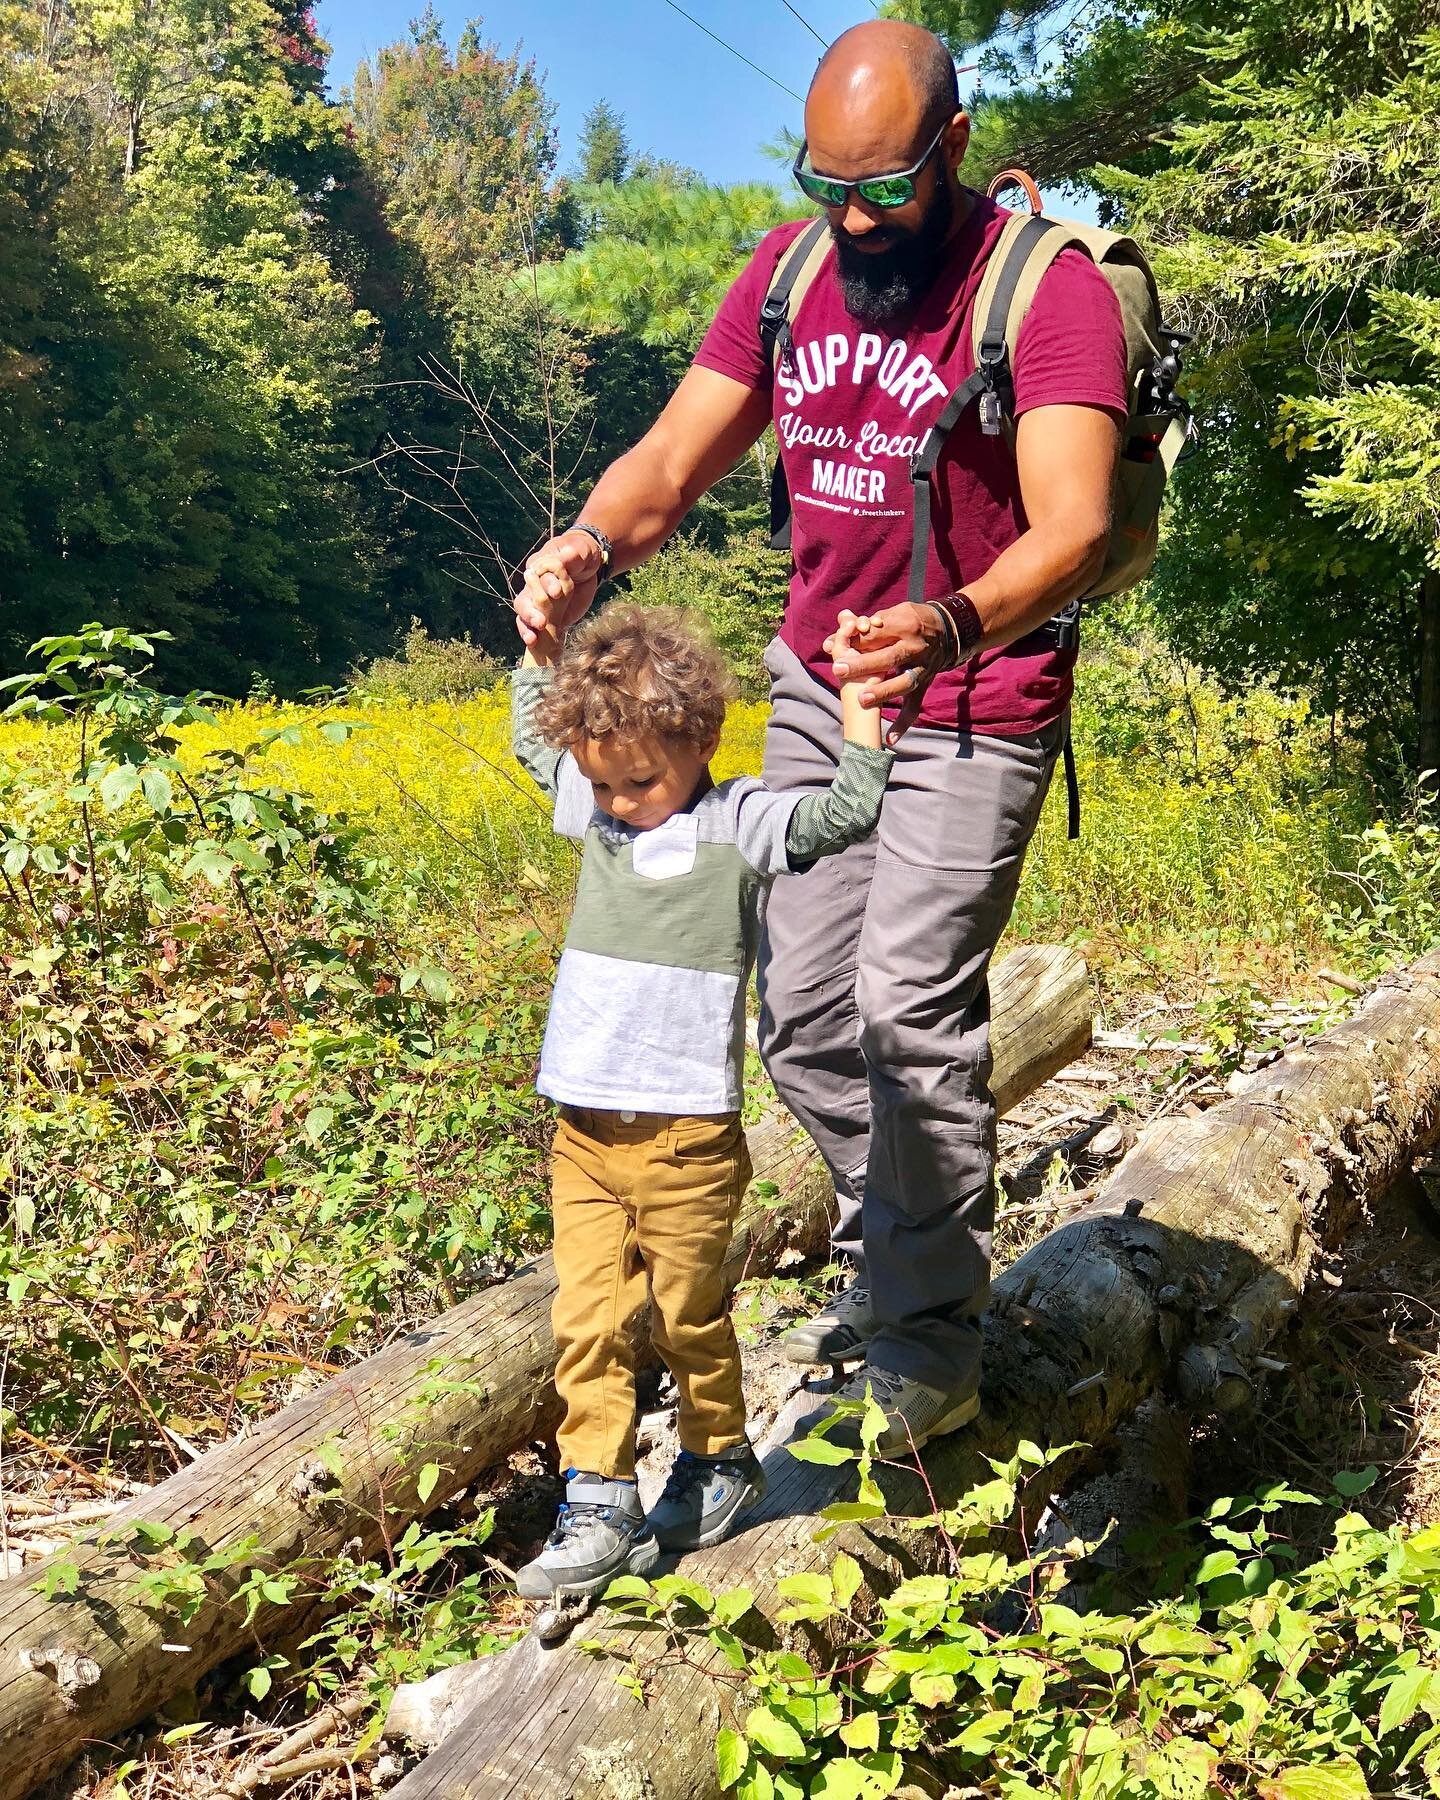 There will come a day when he no longer needs me to hold his hands. But until that day arrives, I will guide him to the best of my ability. 
.
Teaching Kade as he gets older is one of my favorite parts of being his dad. It&rsquo;s so rewarding to see